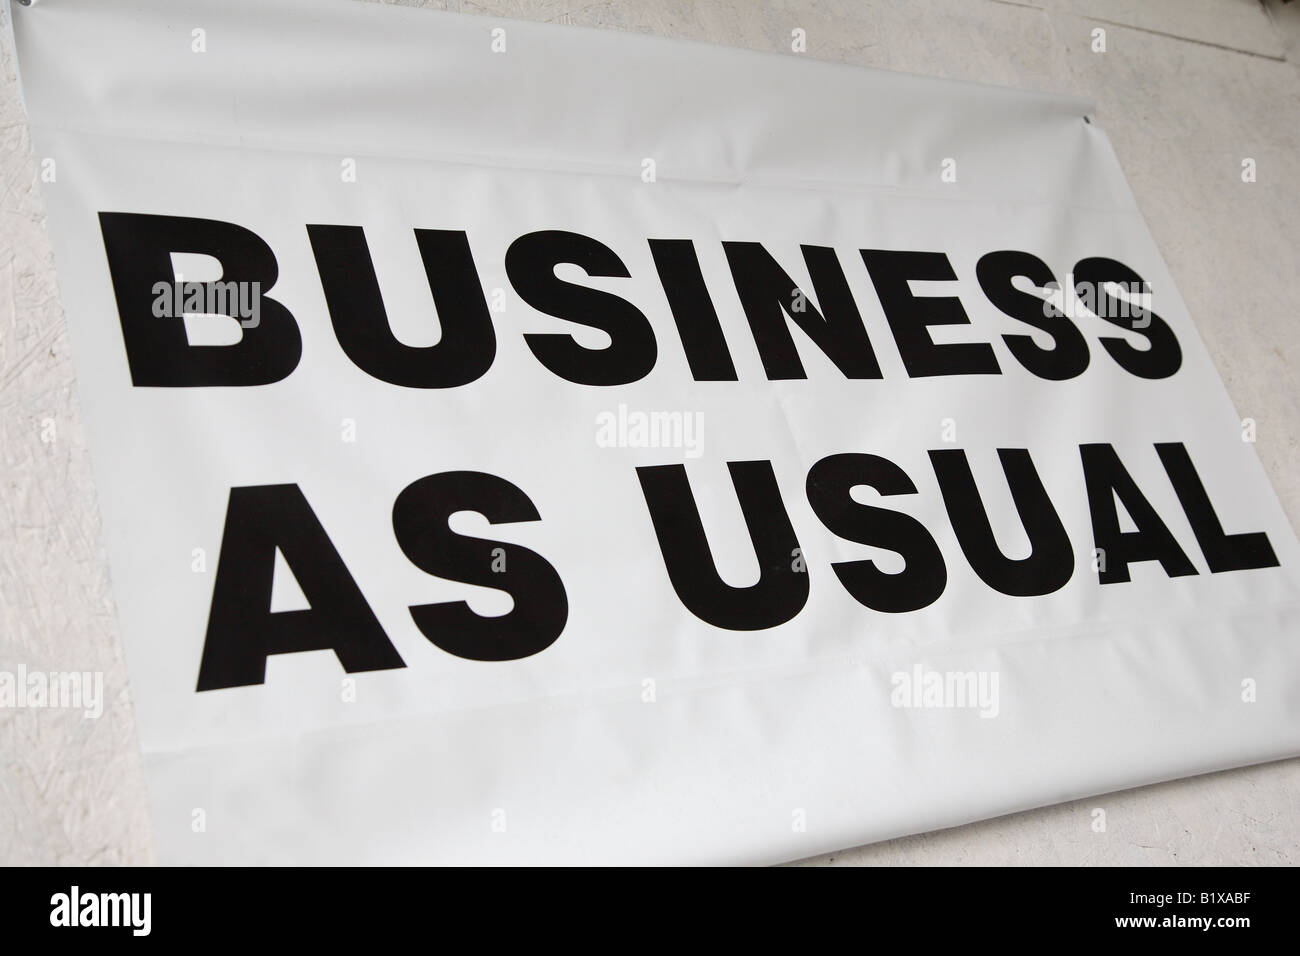 Business as Usual Sign, London, UK Stock Photo